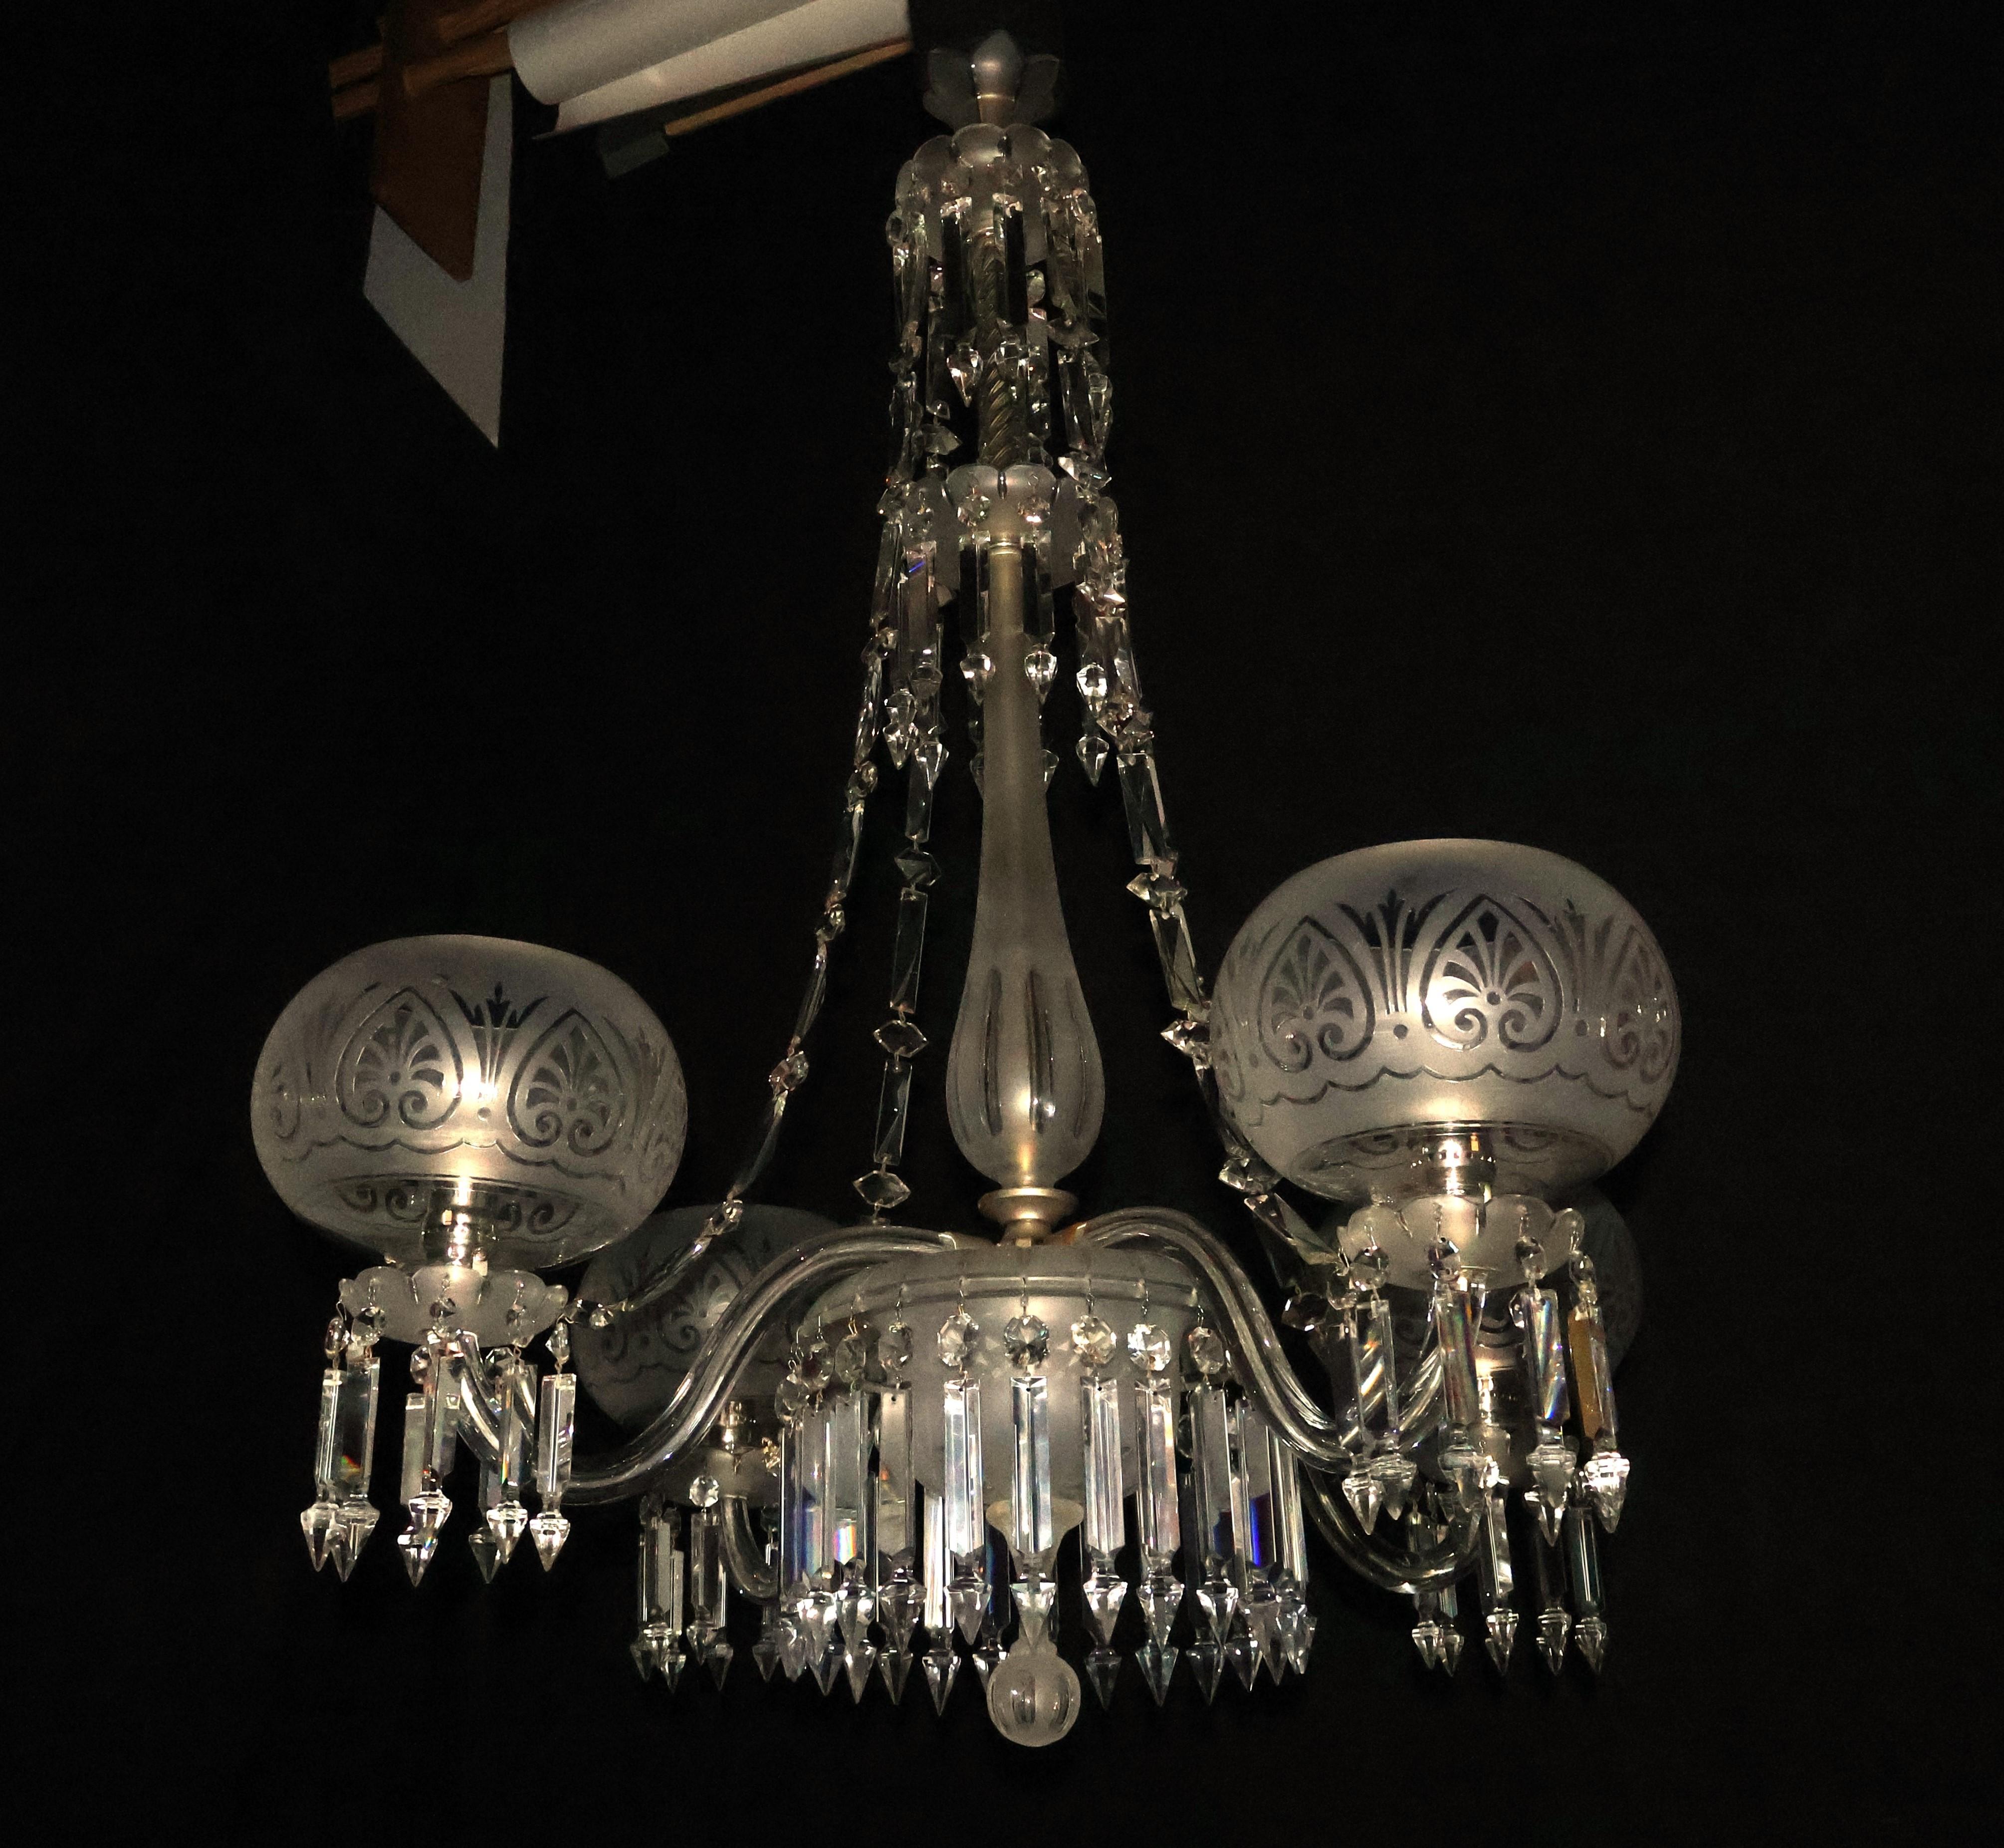 An Exquisite Gasolier Chandelier, now electrified. Four original etched crystal shades. England circa 1800. 
Dimensions: Height 41